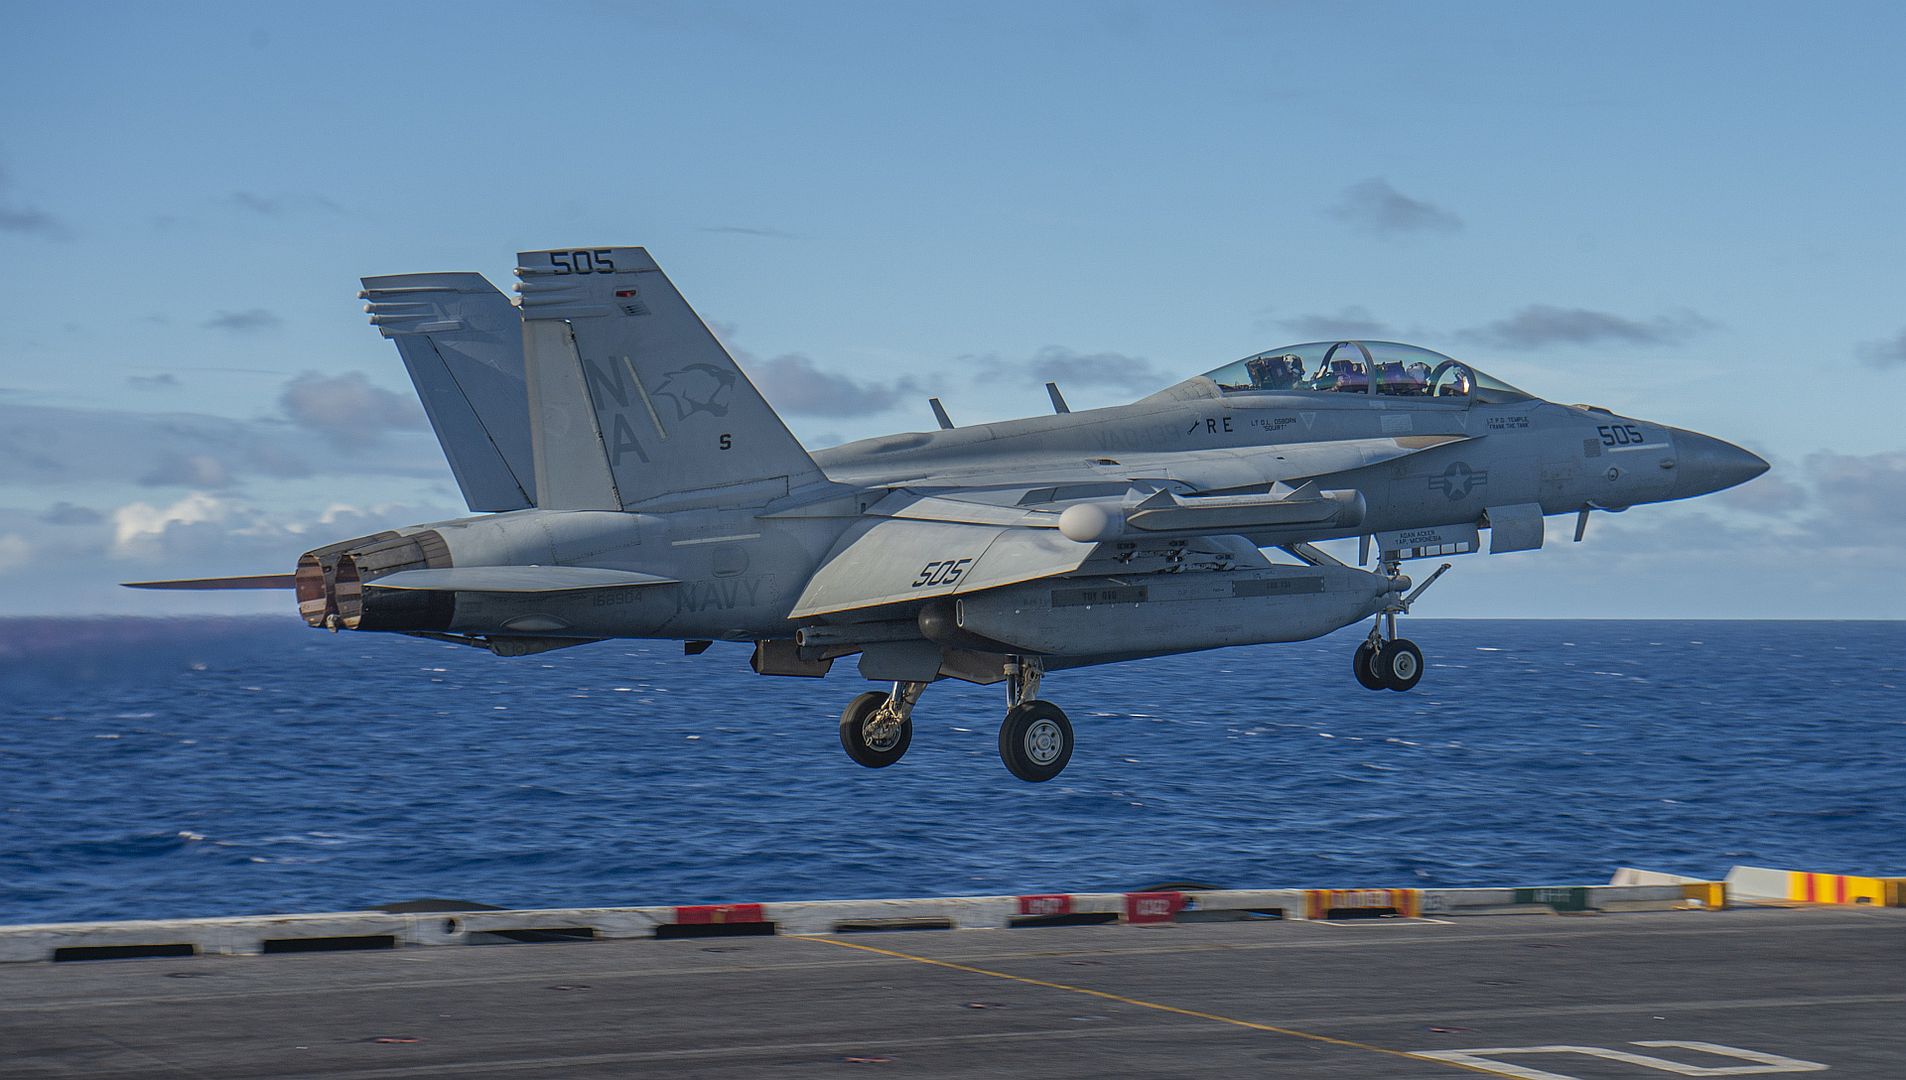 18G Growler From The Cougars Of Electronic Attack Squadron 139 Launches From The Aircraft Carrier USS Nimitz